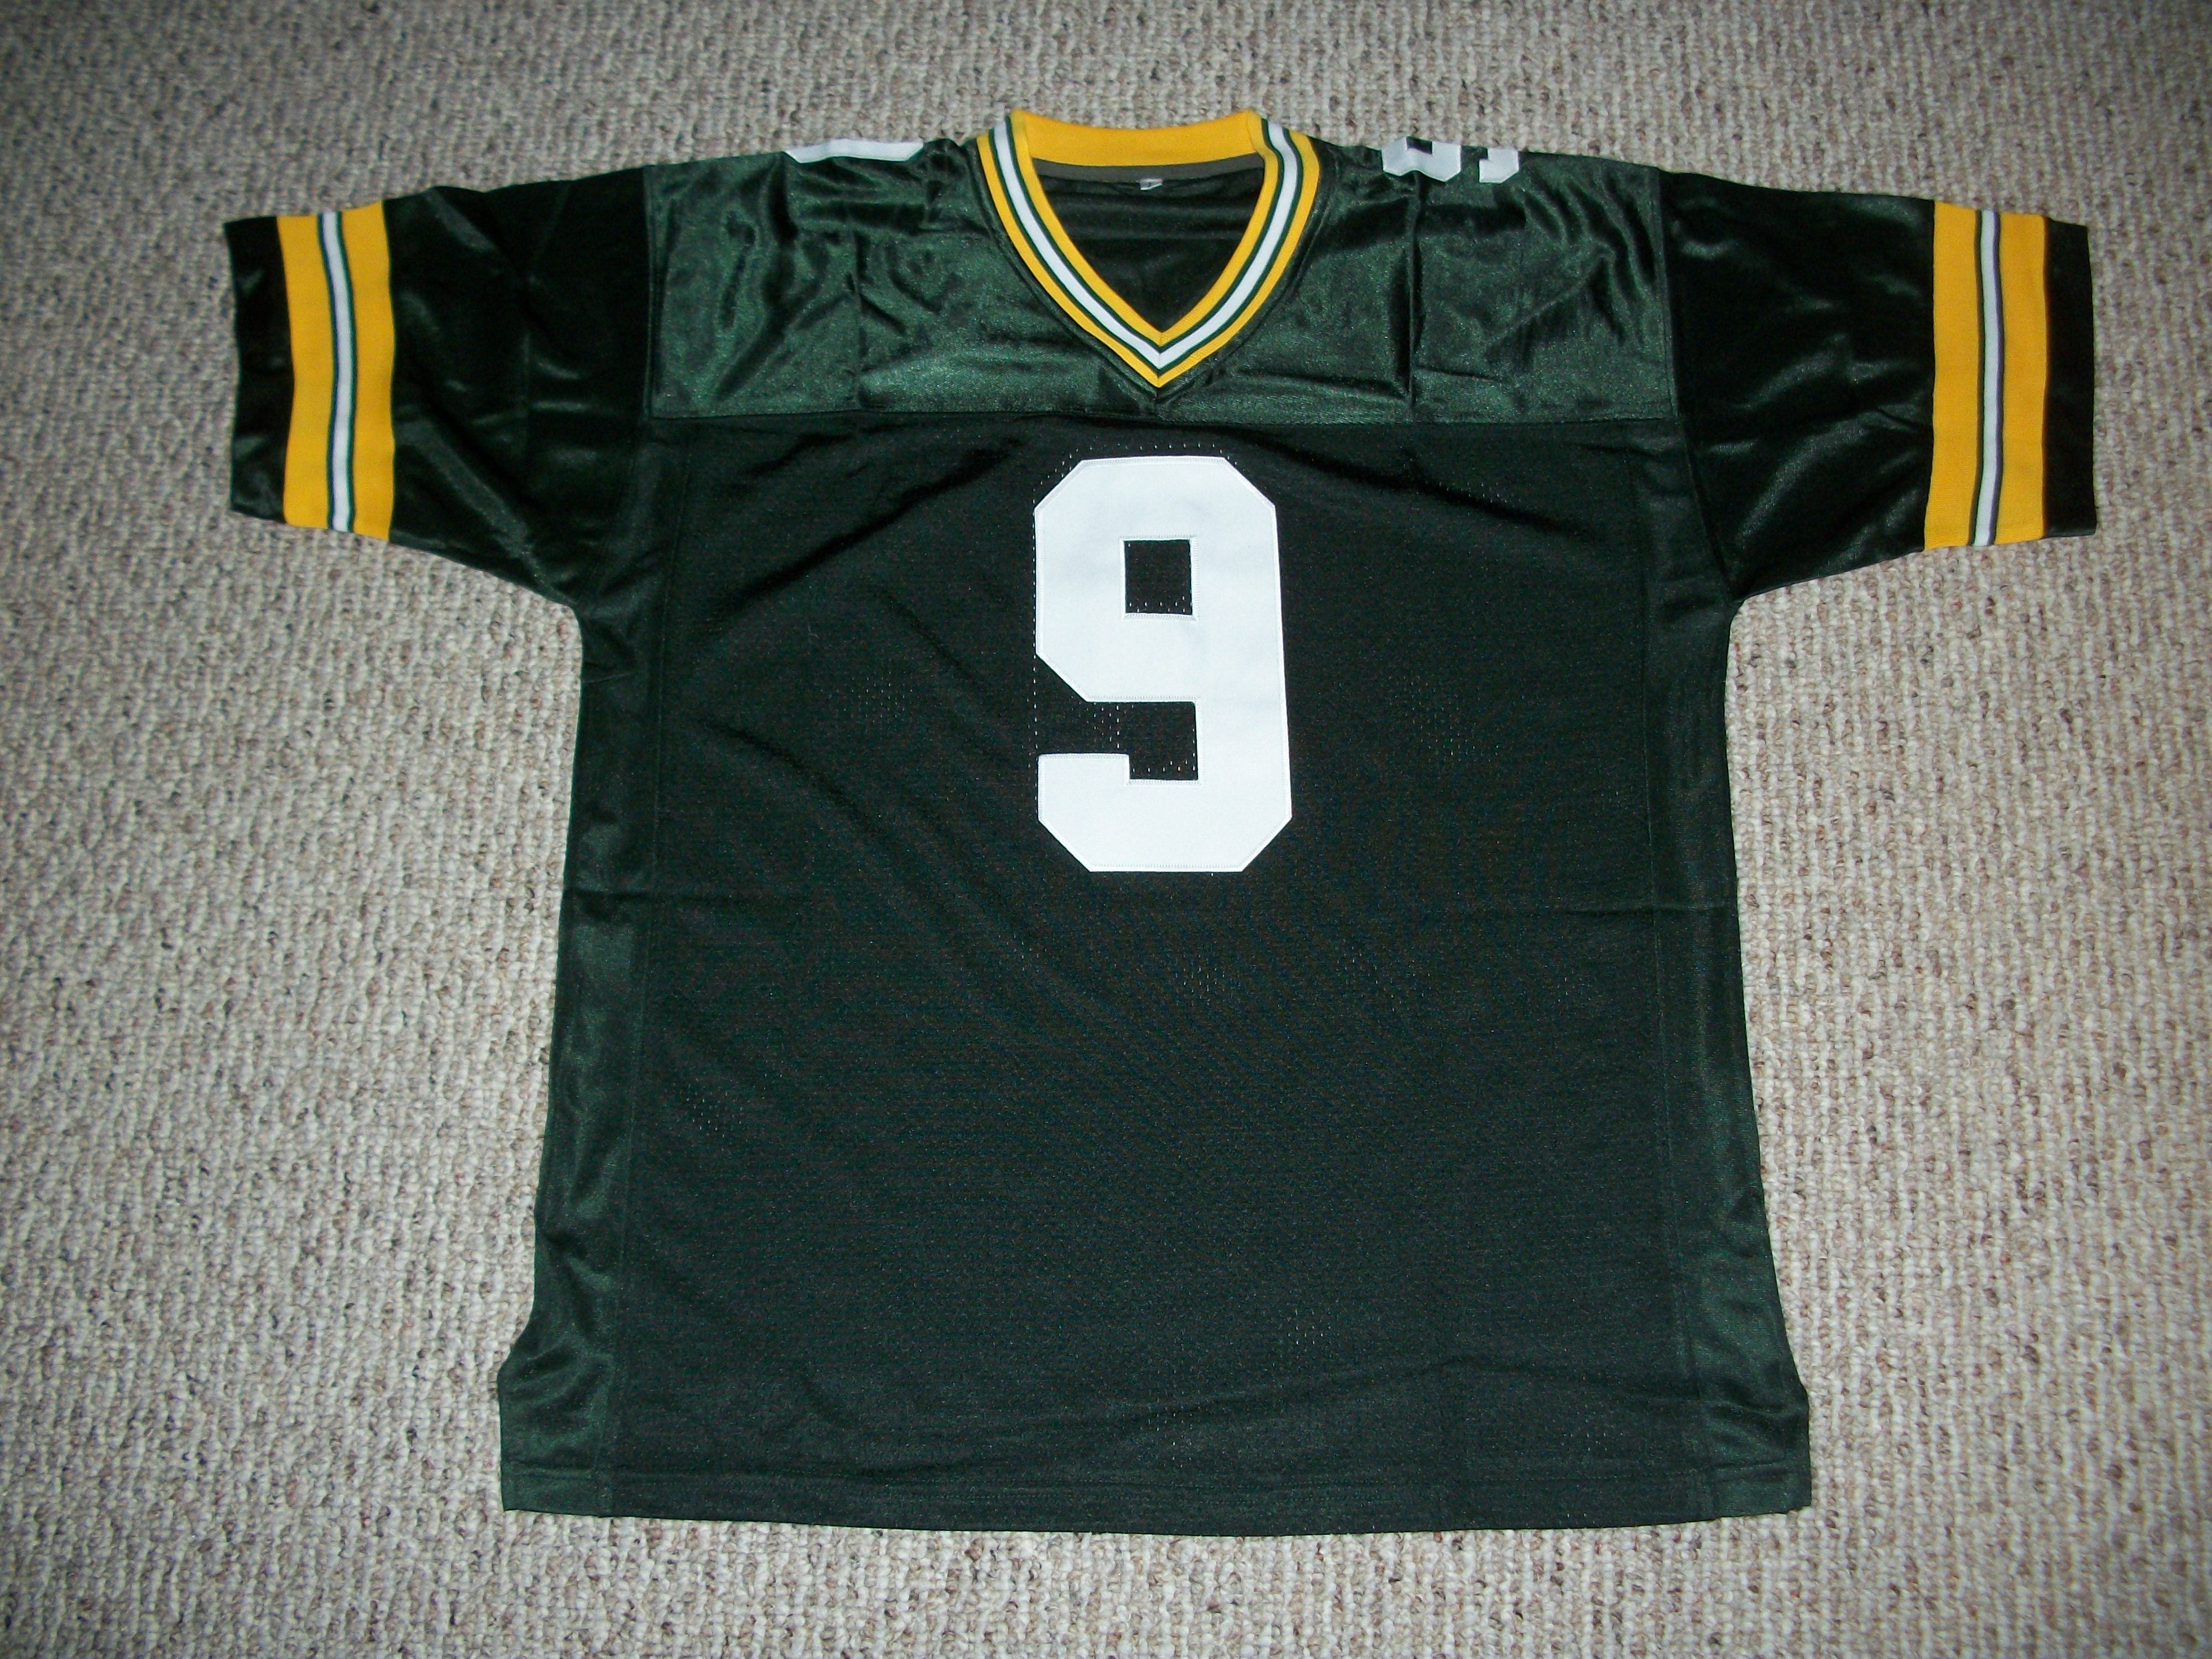 Unsigned Christian Watson Jersey #9 Green Bay Custom Stitched White  Football New No Brands/Logos Sizes S-3XL 